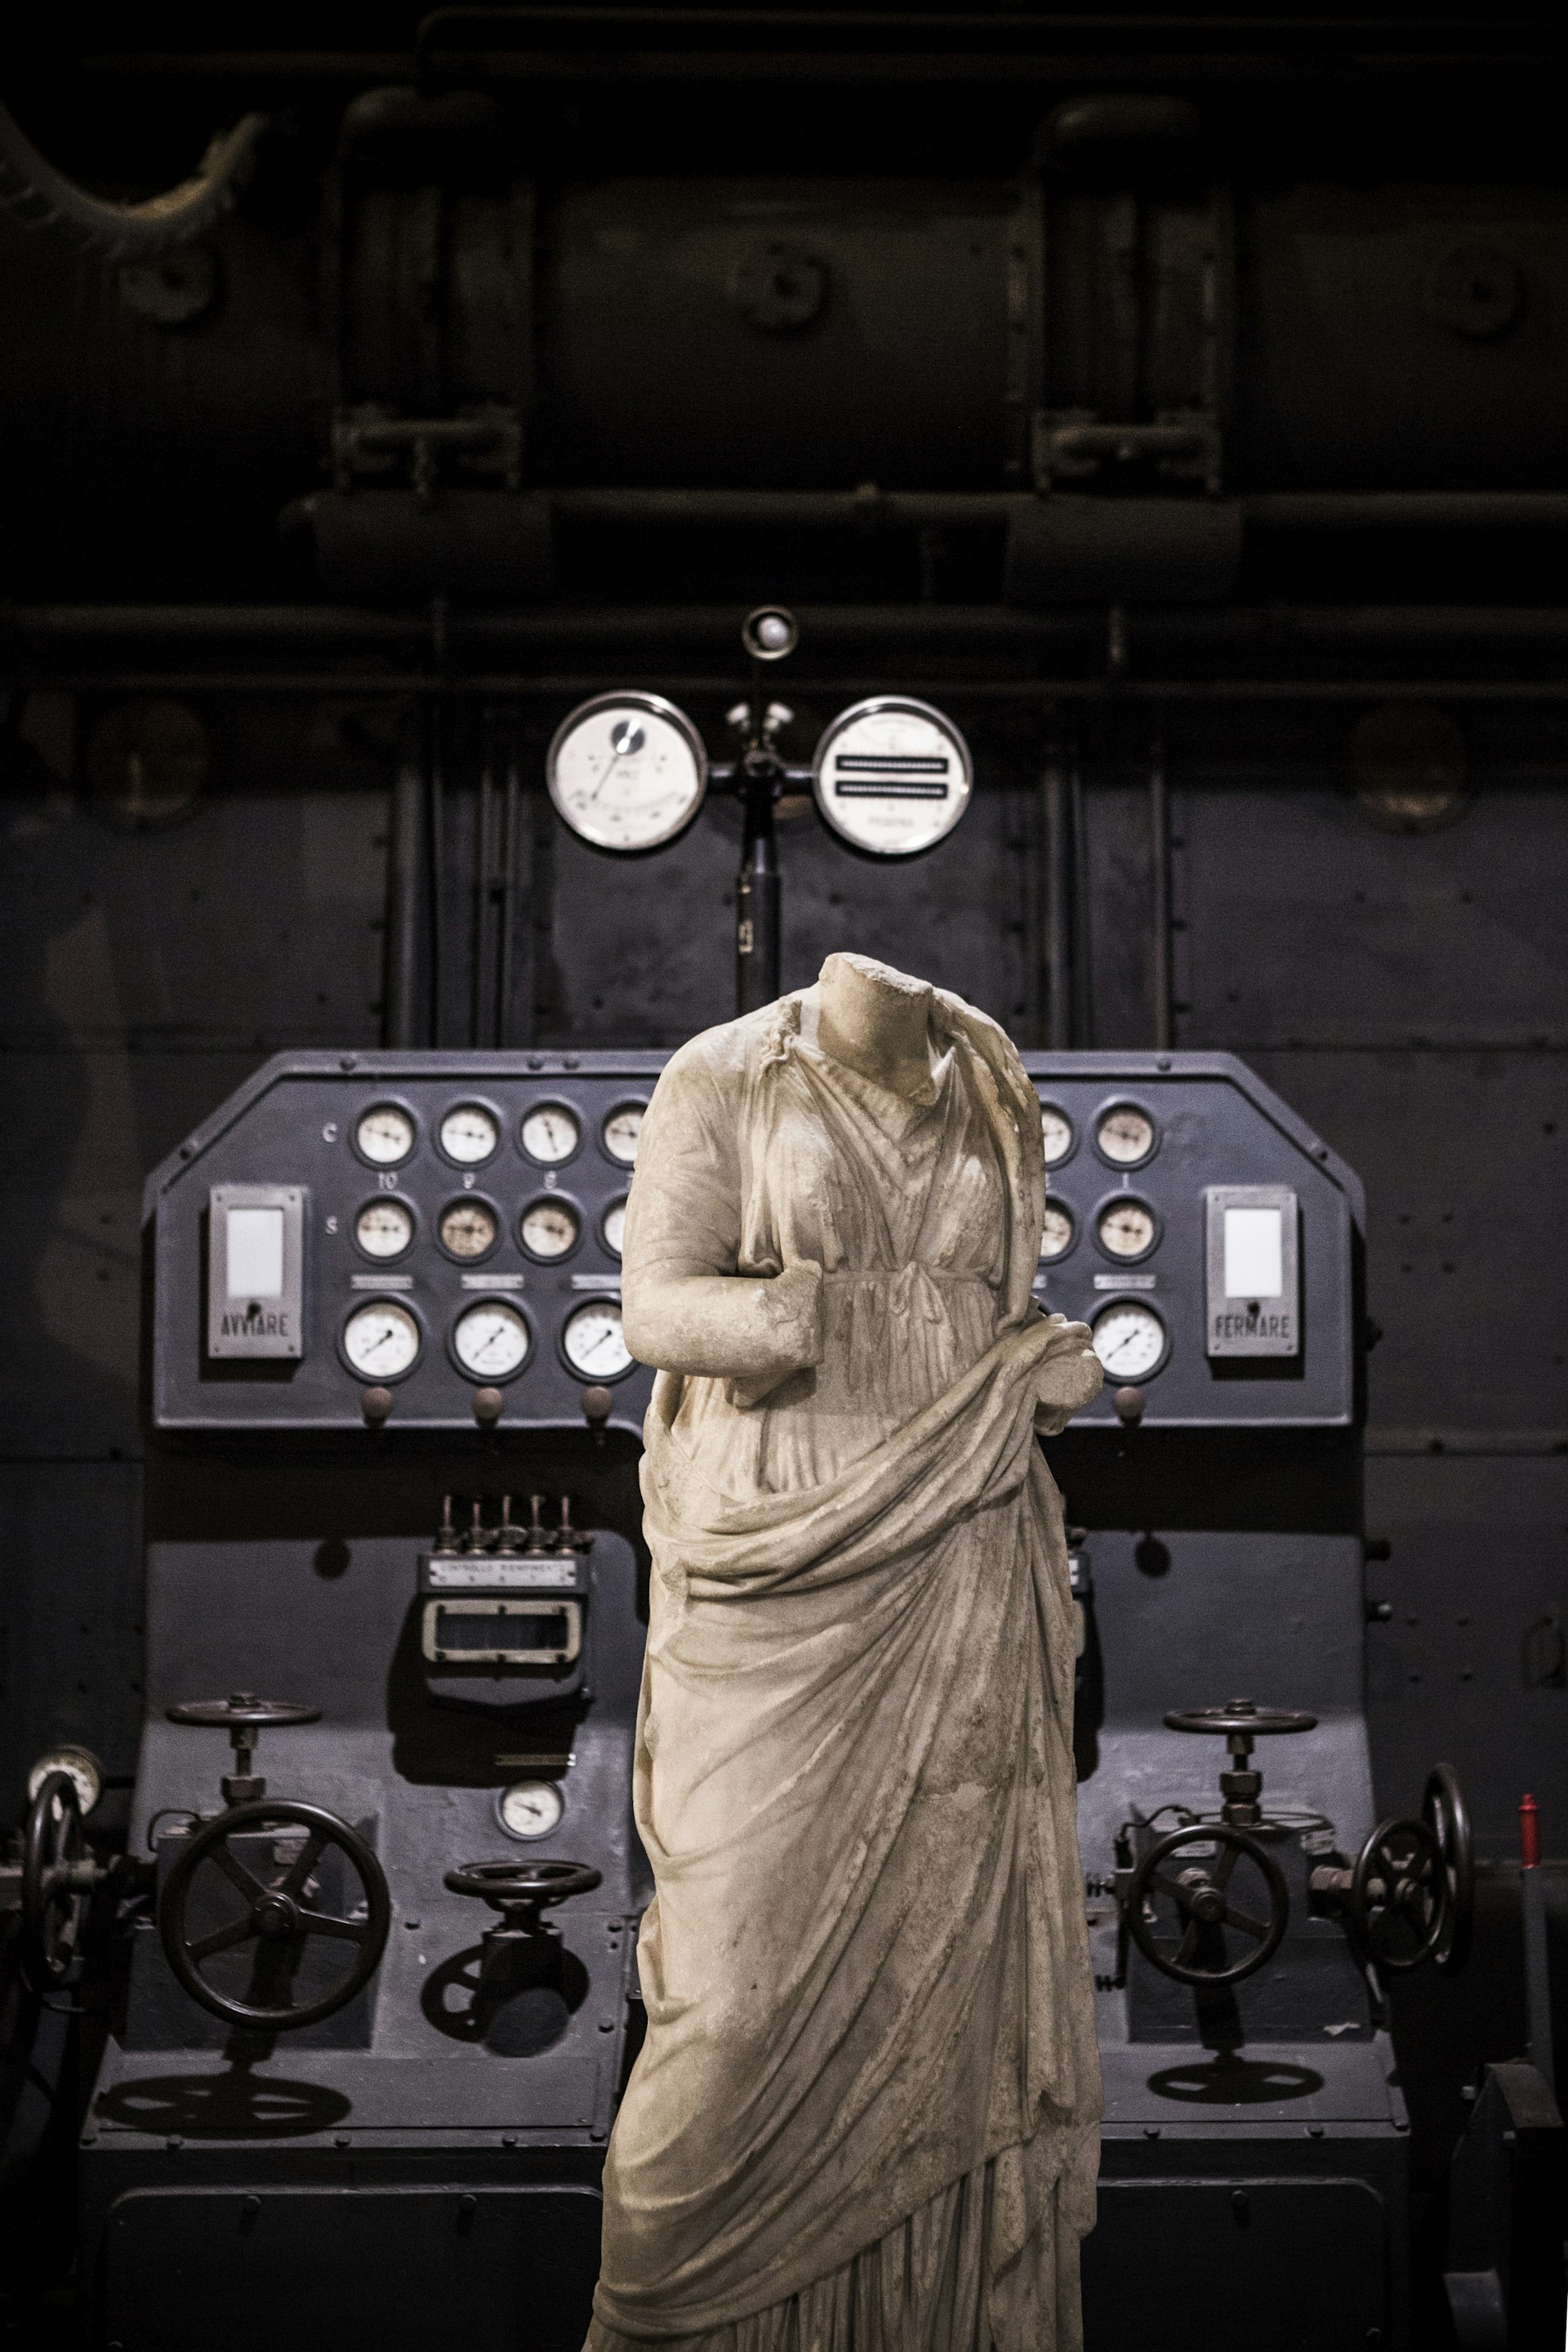 A white, headless, marble statue stands in front of an old black control station that has many dials and gauges.